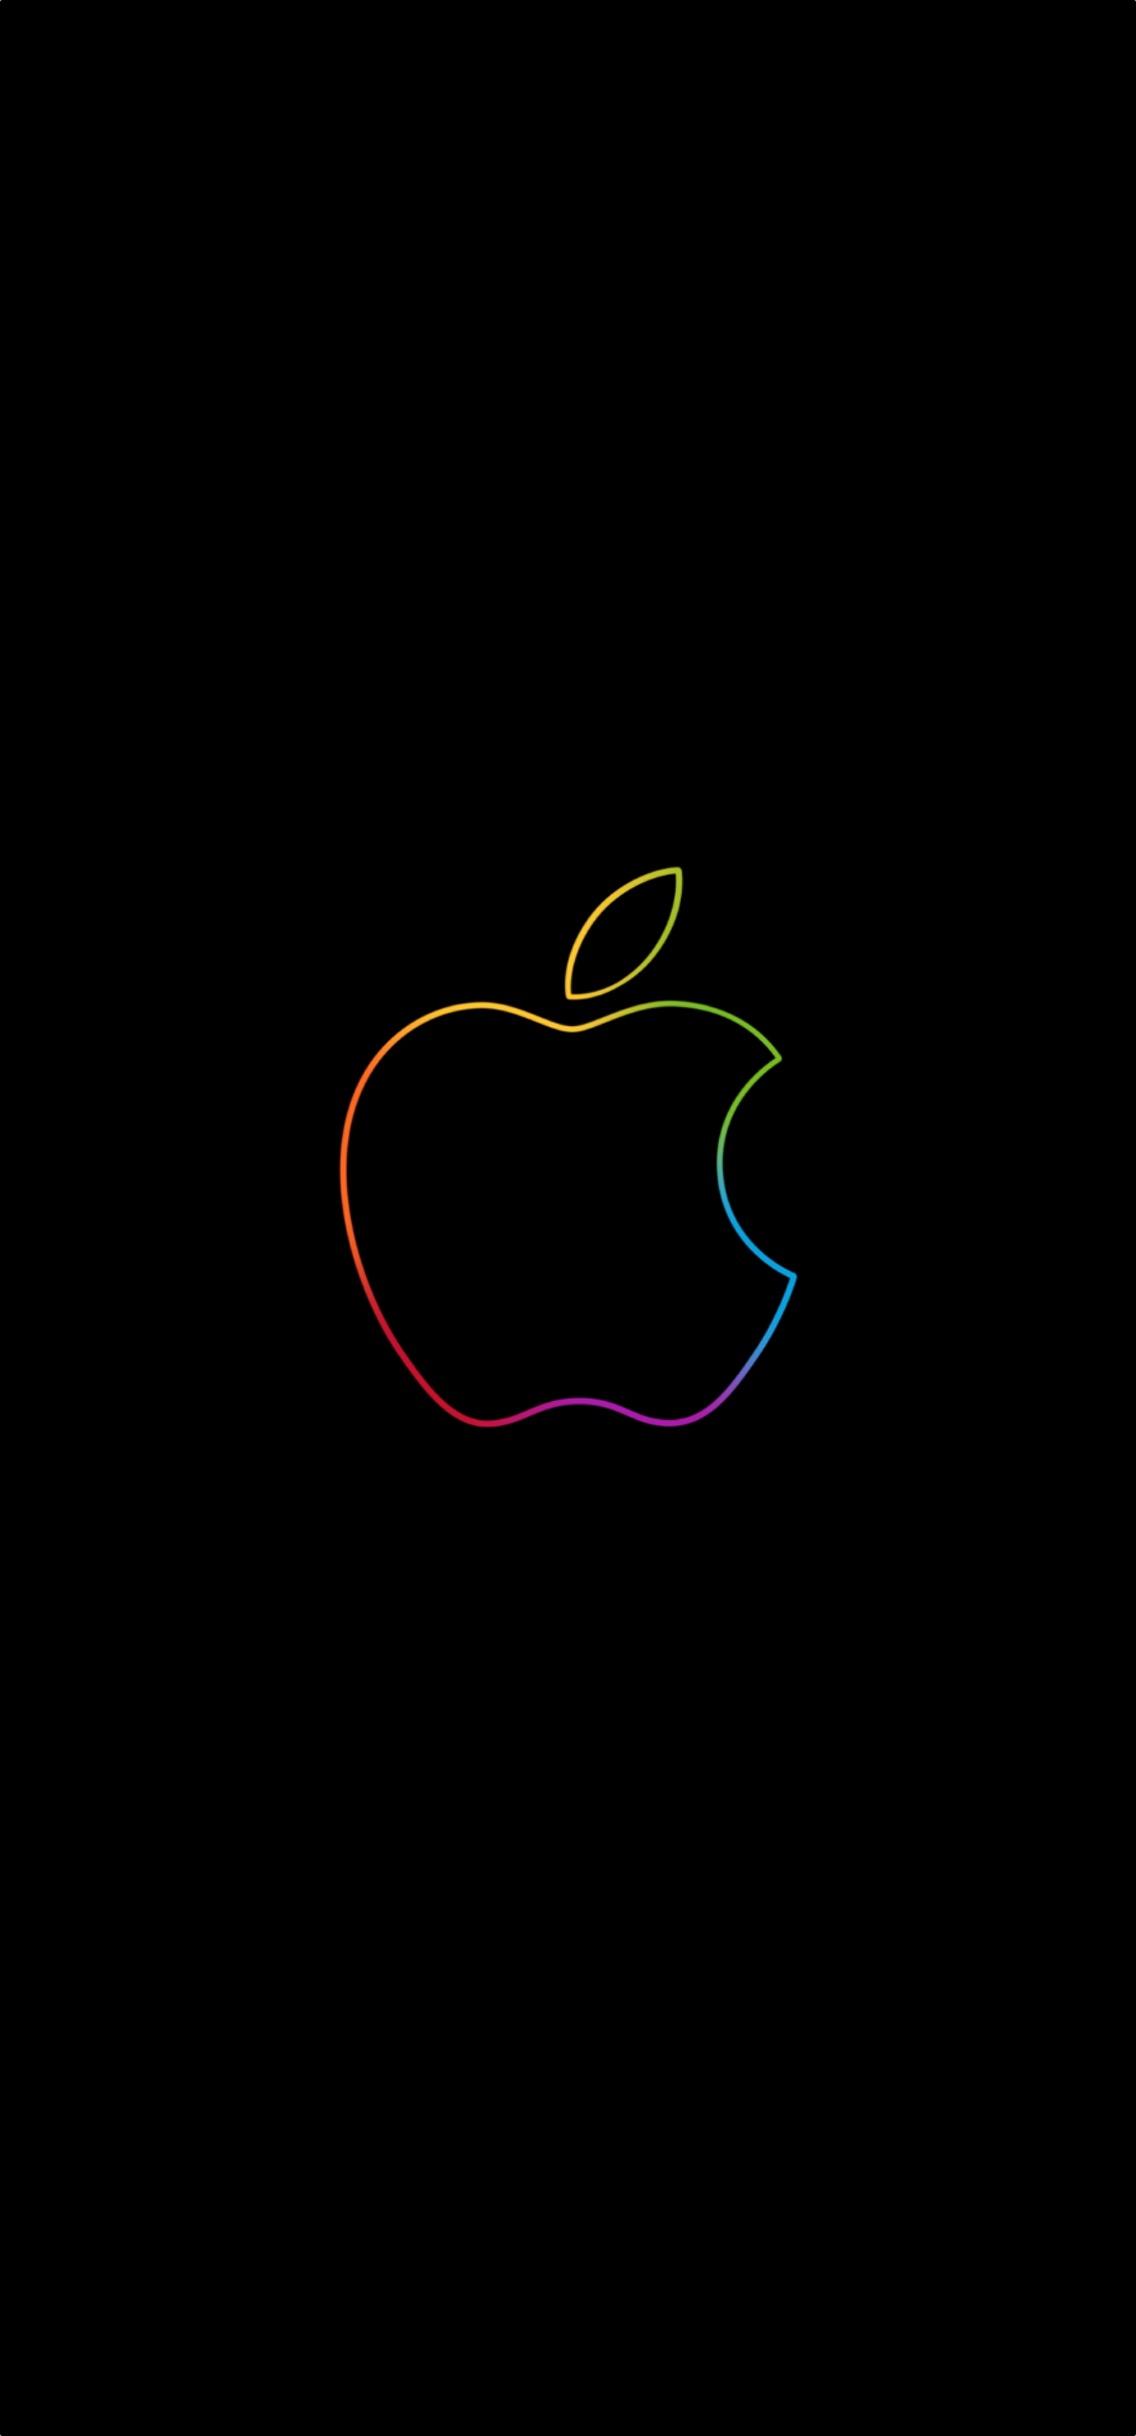 Cool Apple Logo Iphone Wallpapers